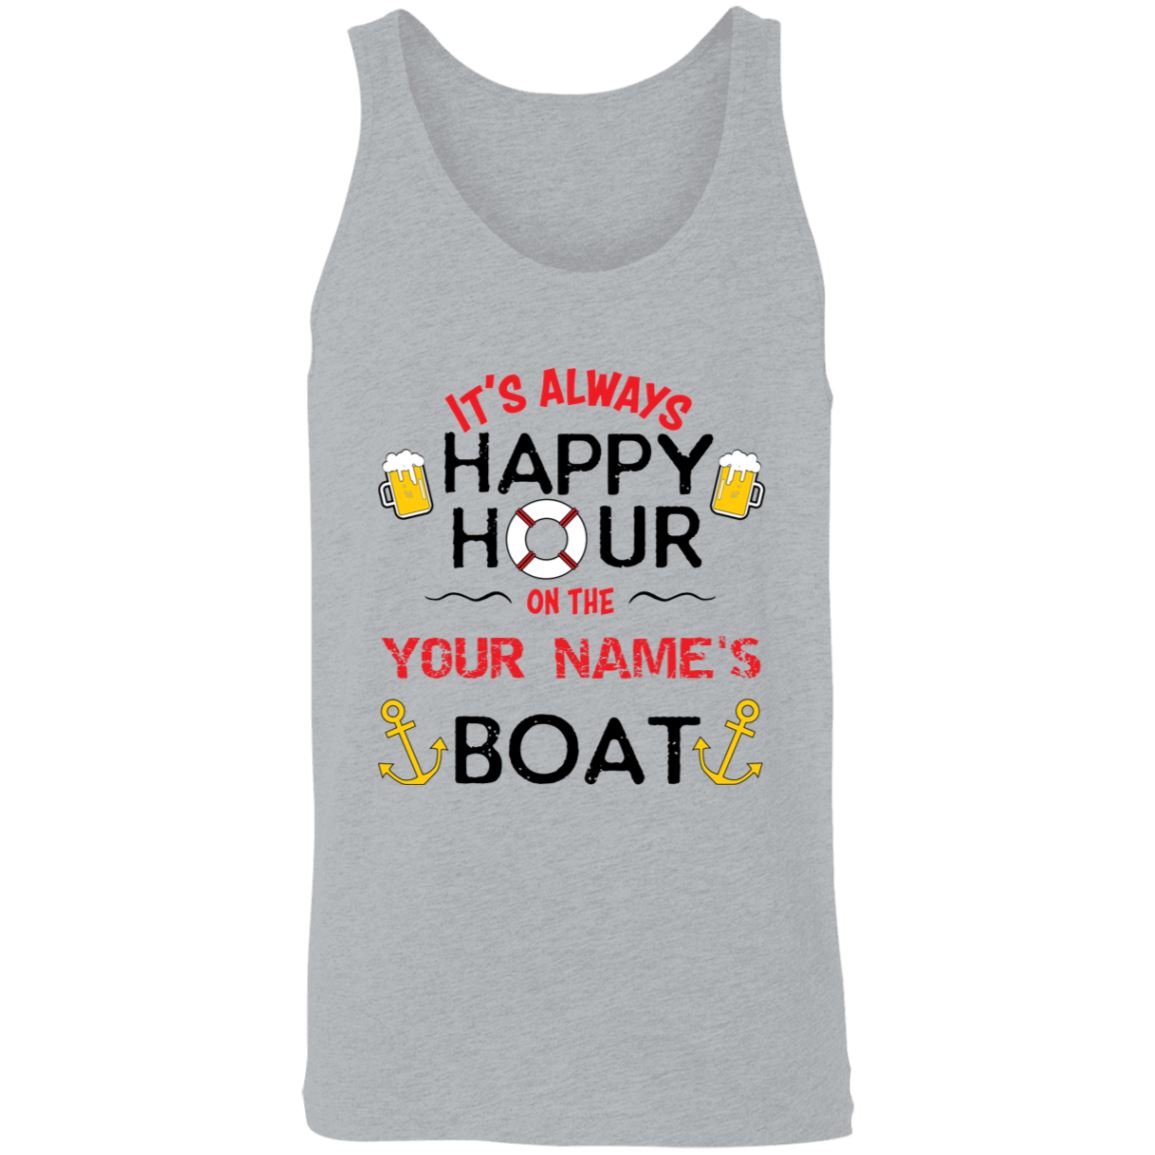 It's Always Happy Hour On Your Boat Premium Unisex Tank (Made in the USA 🇺🇸 ) - Houseboat Kings